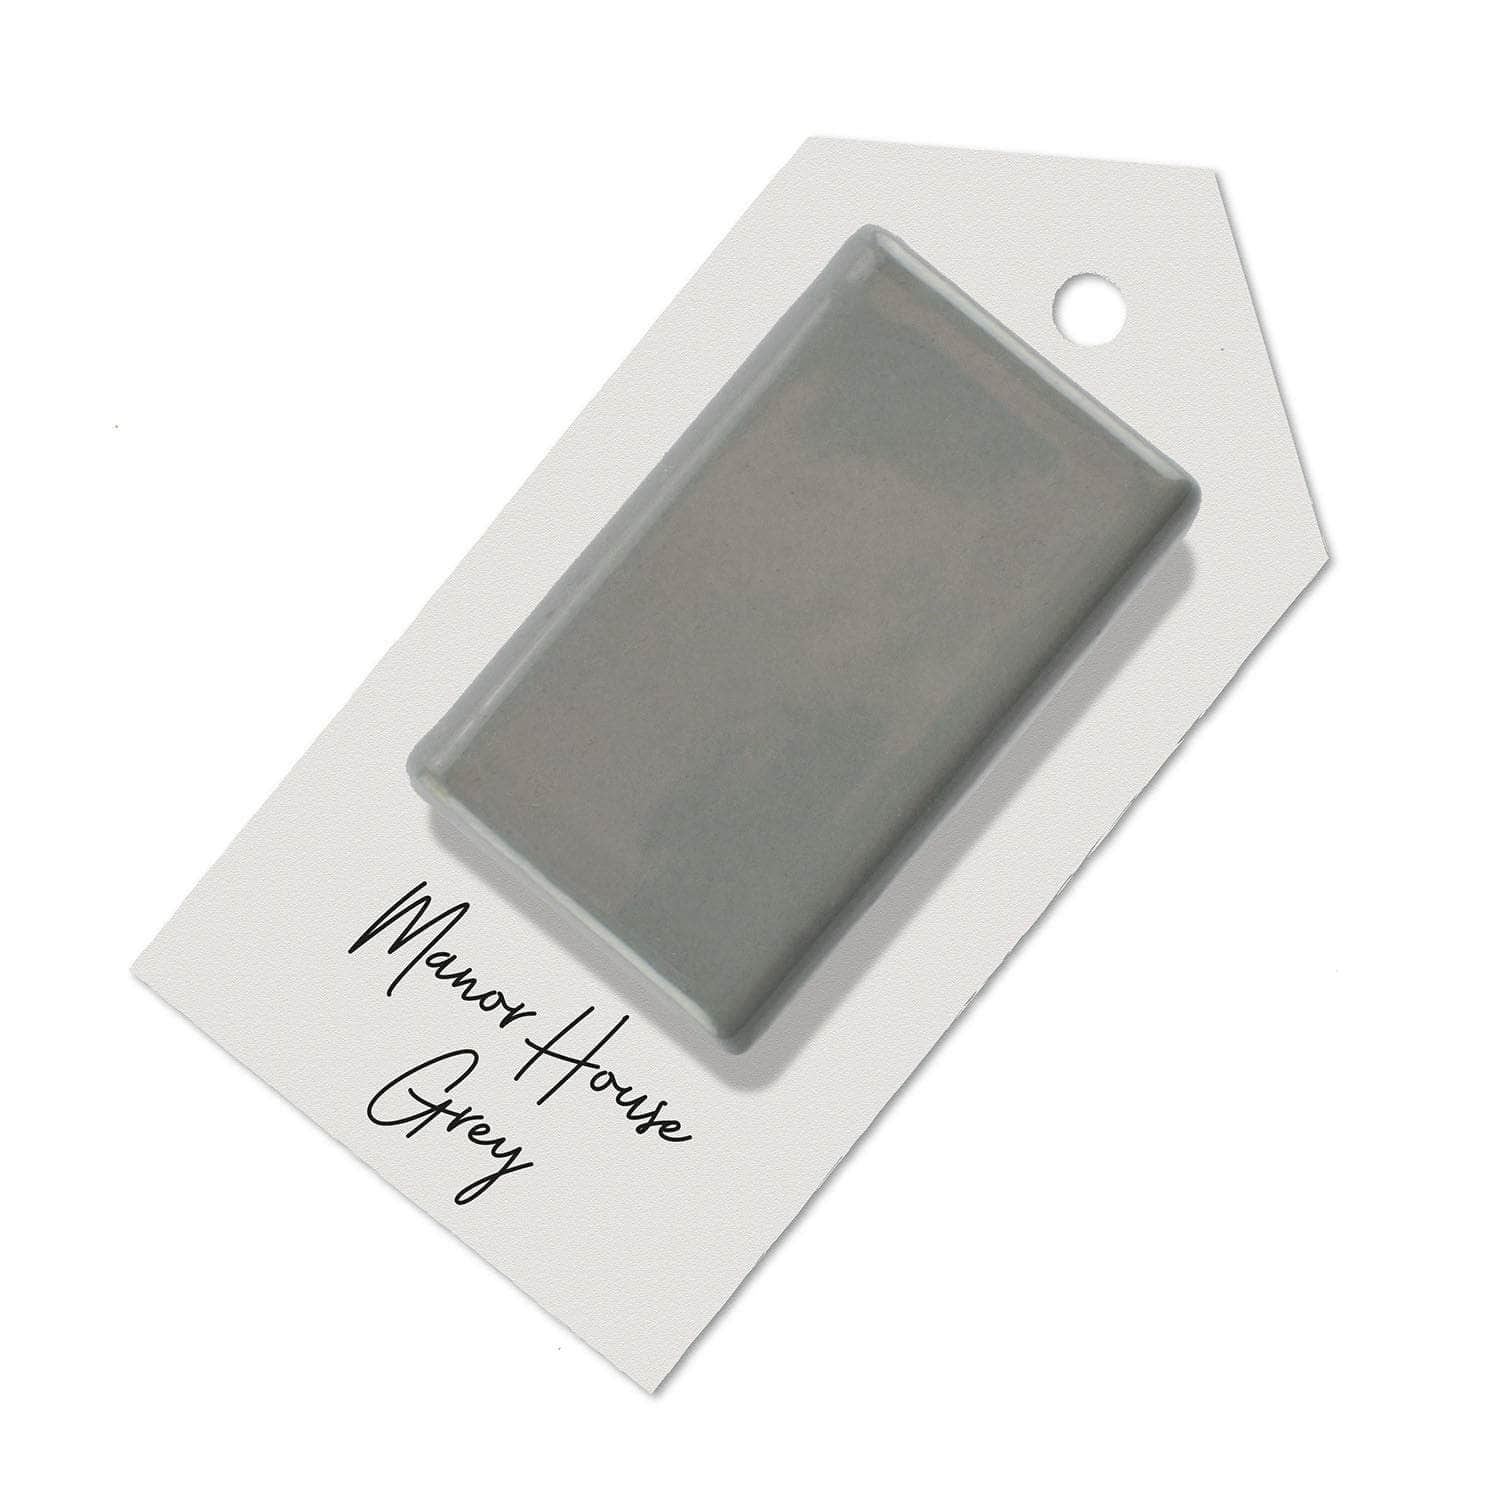 Manor House Grey sample for Aga range cooker re-enamelling & reconditioned cookers